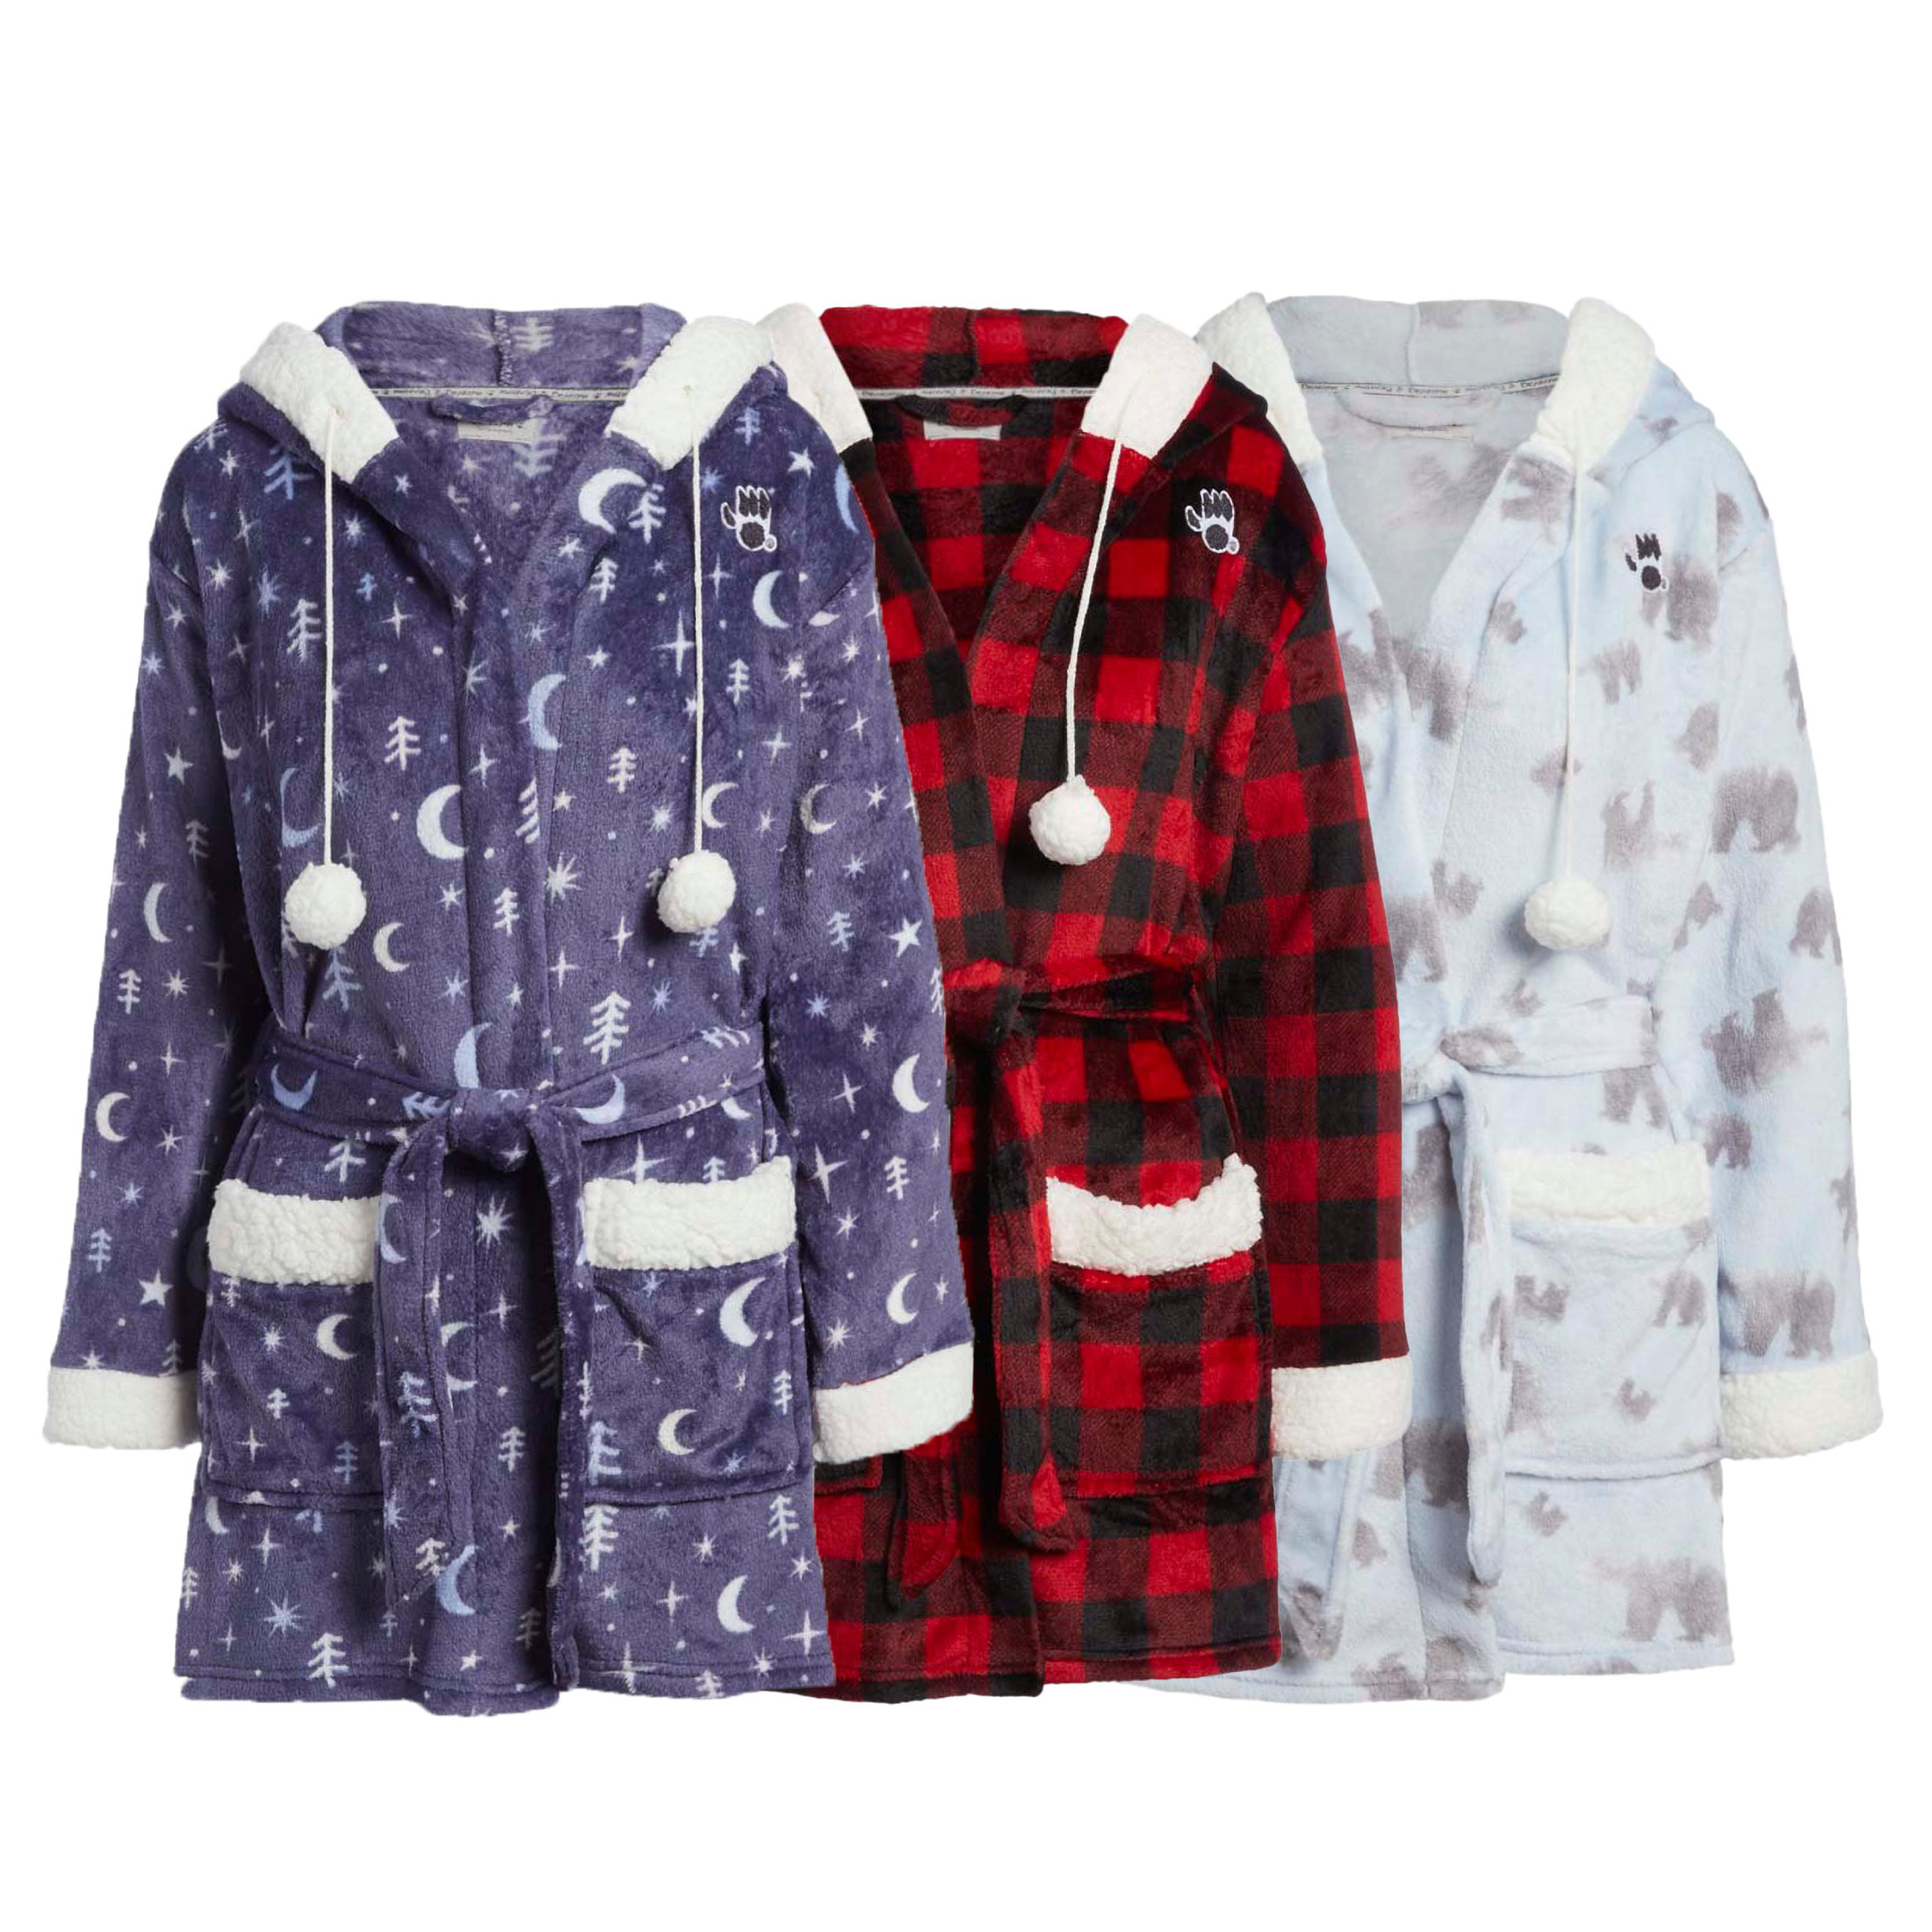 2-Pack: Women's Soft Plush Sherpa Lined Trim Print Robe With Pockets And Hood - Large